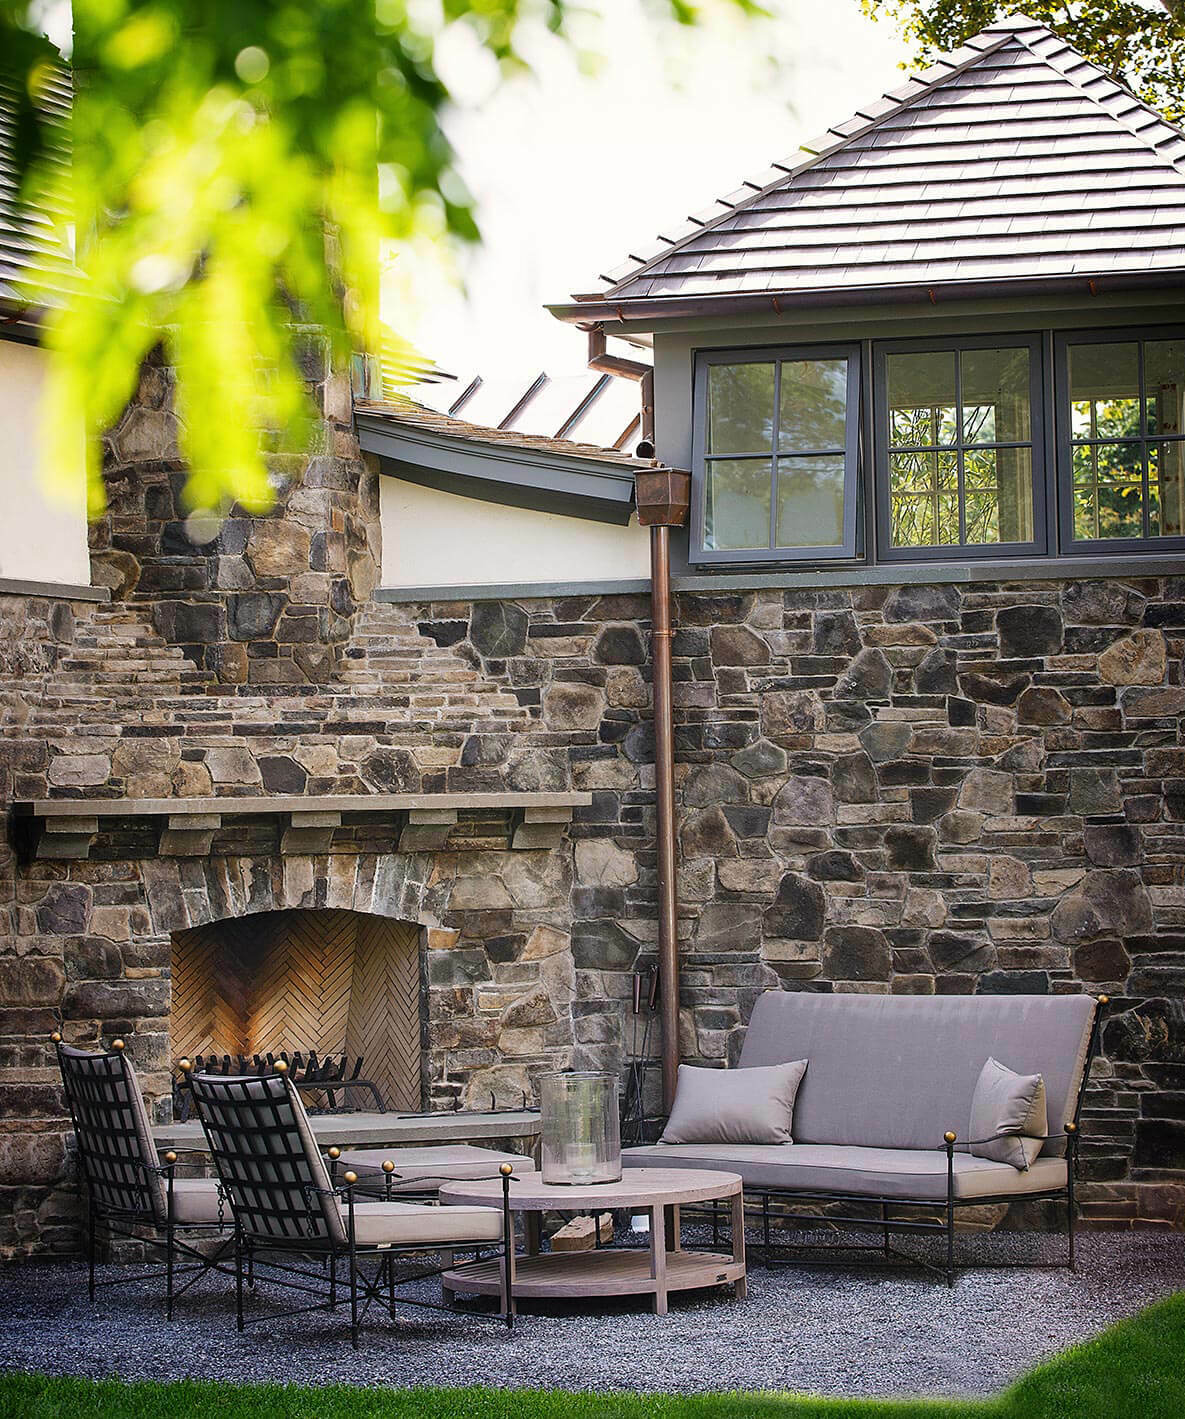 A patio with fireplace at a Building Details house. COURTESY BUILDING DETAILS